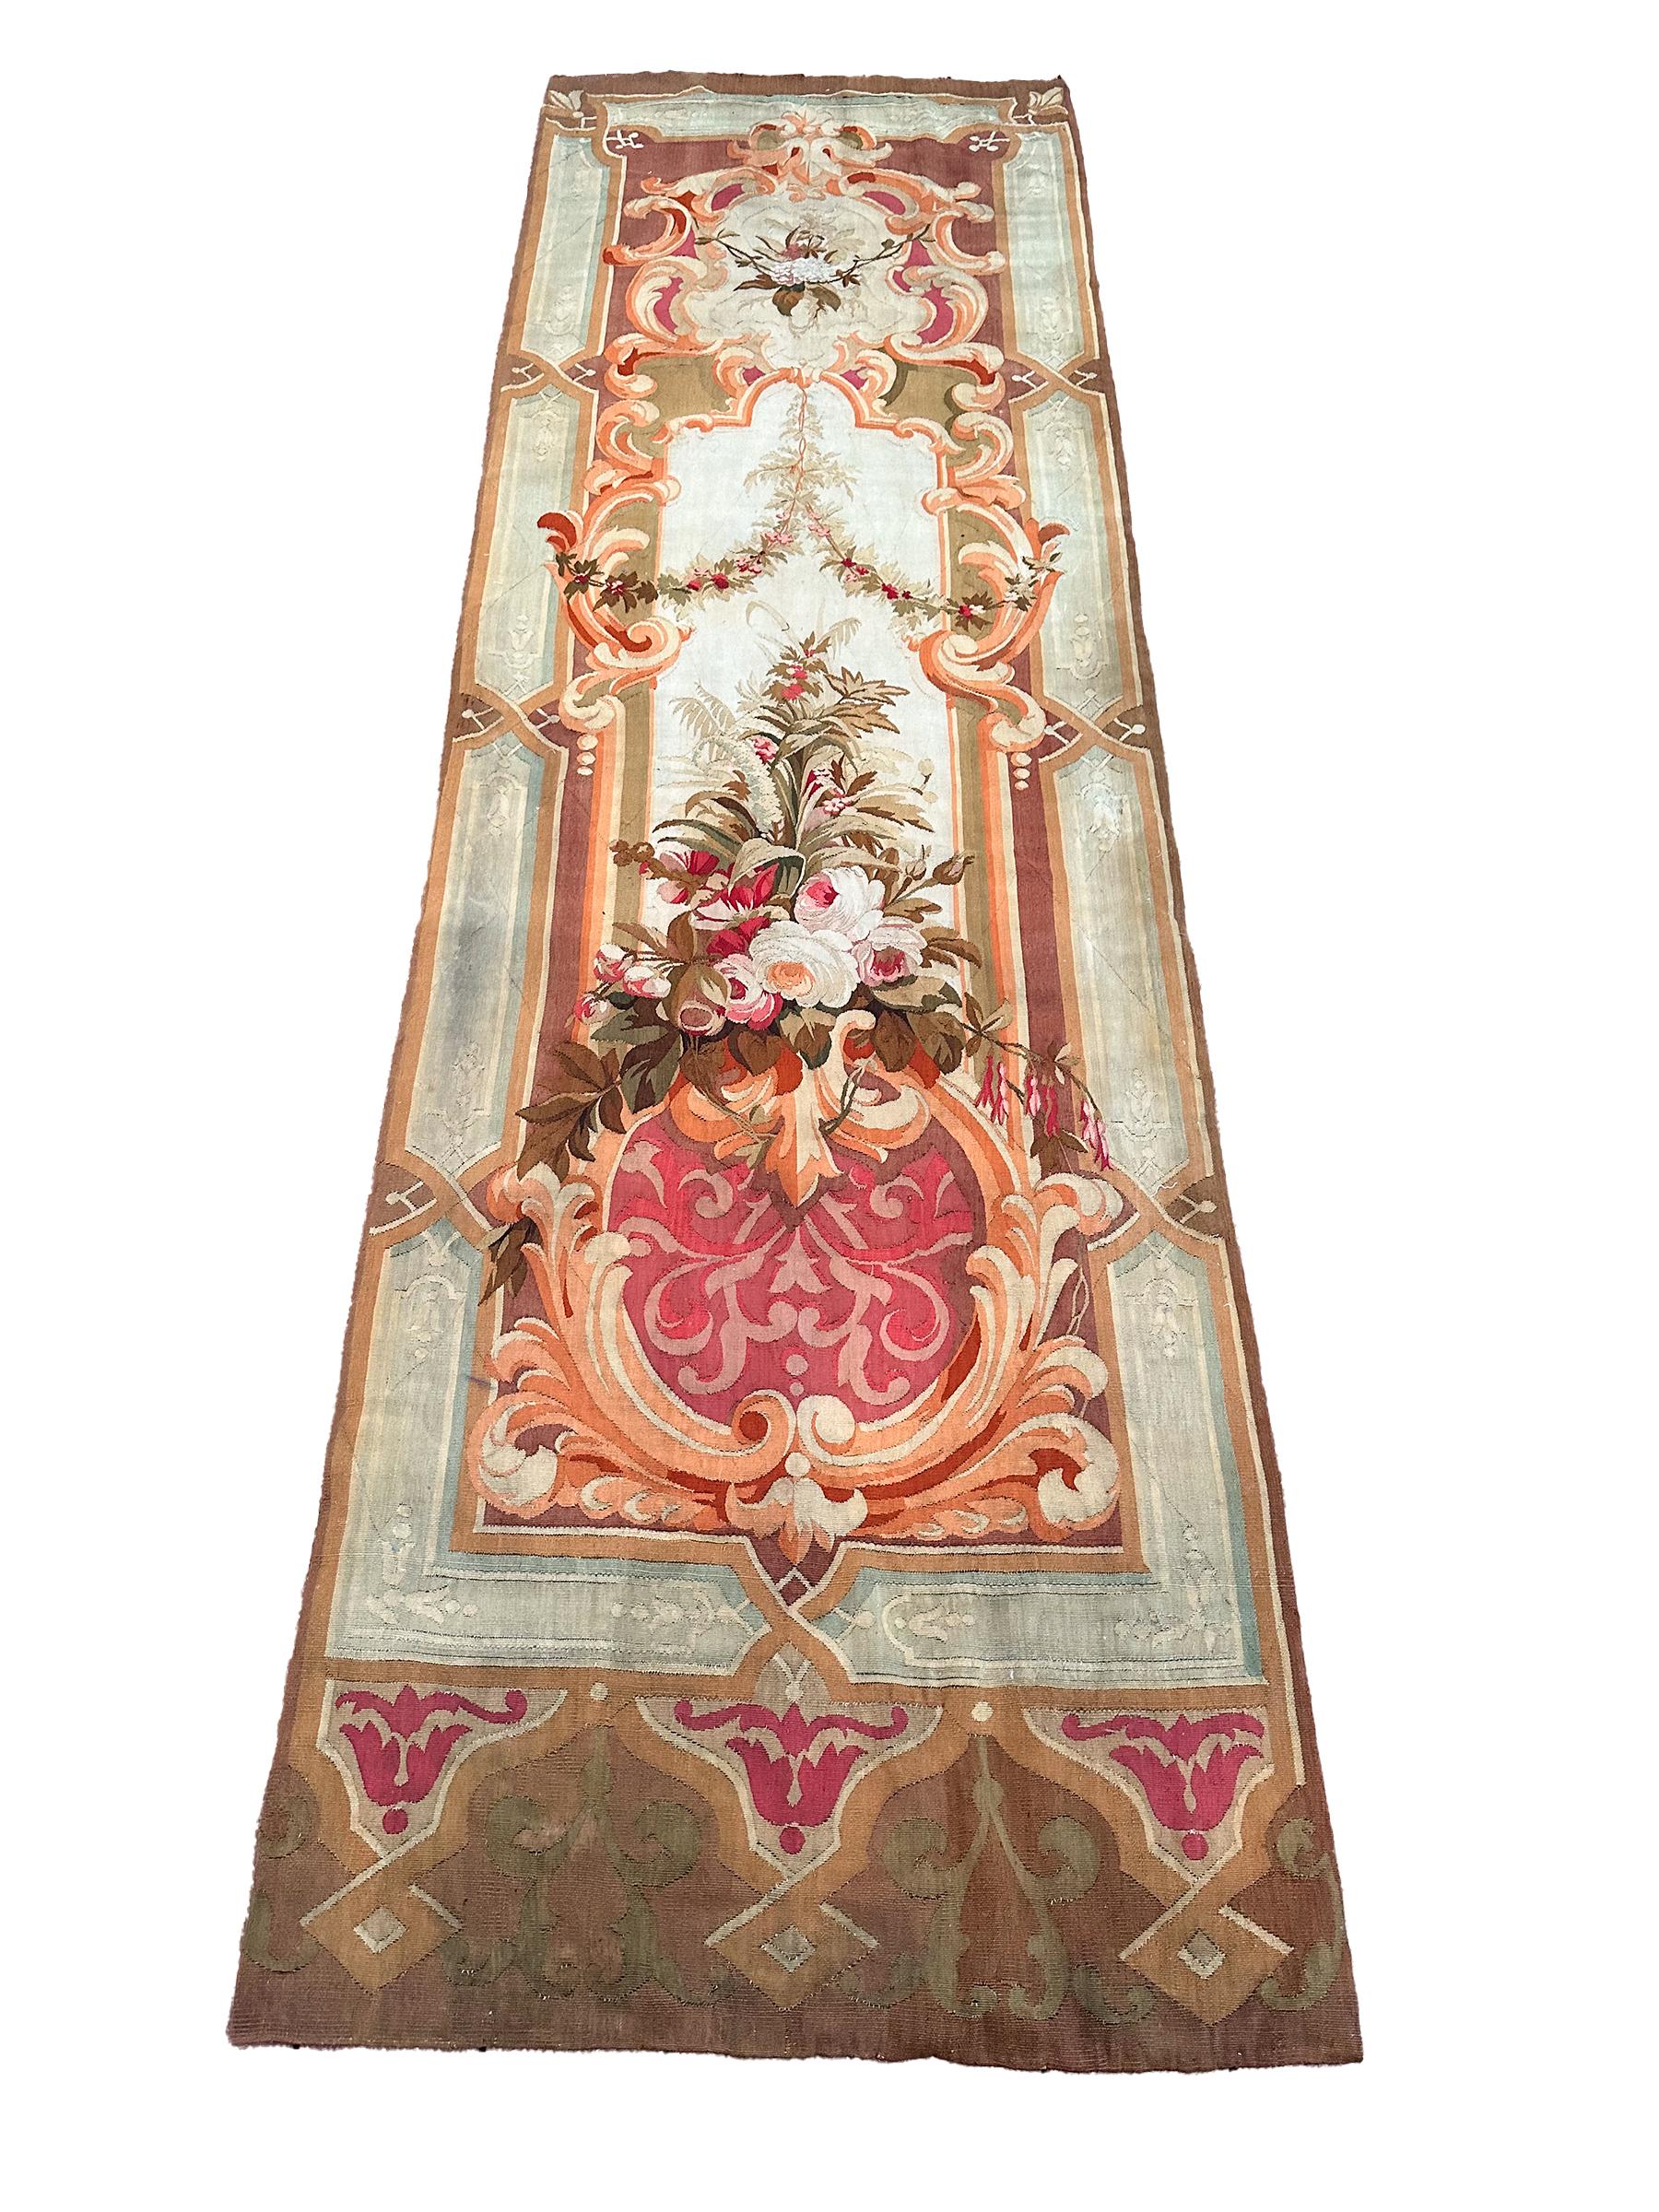 1920 Antique French Aubusson Tapestry Rug Floral Vase Runner 3x10 1880 97x287cm For Sale 5